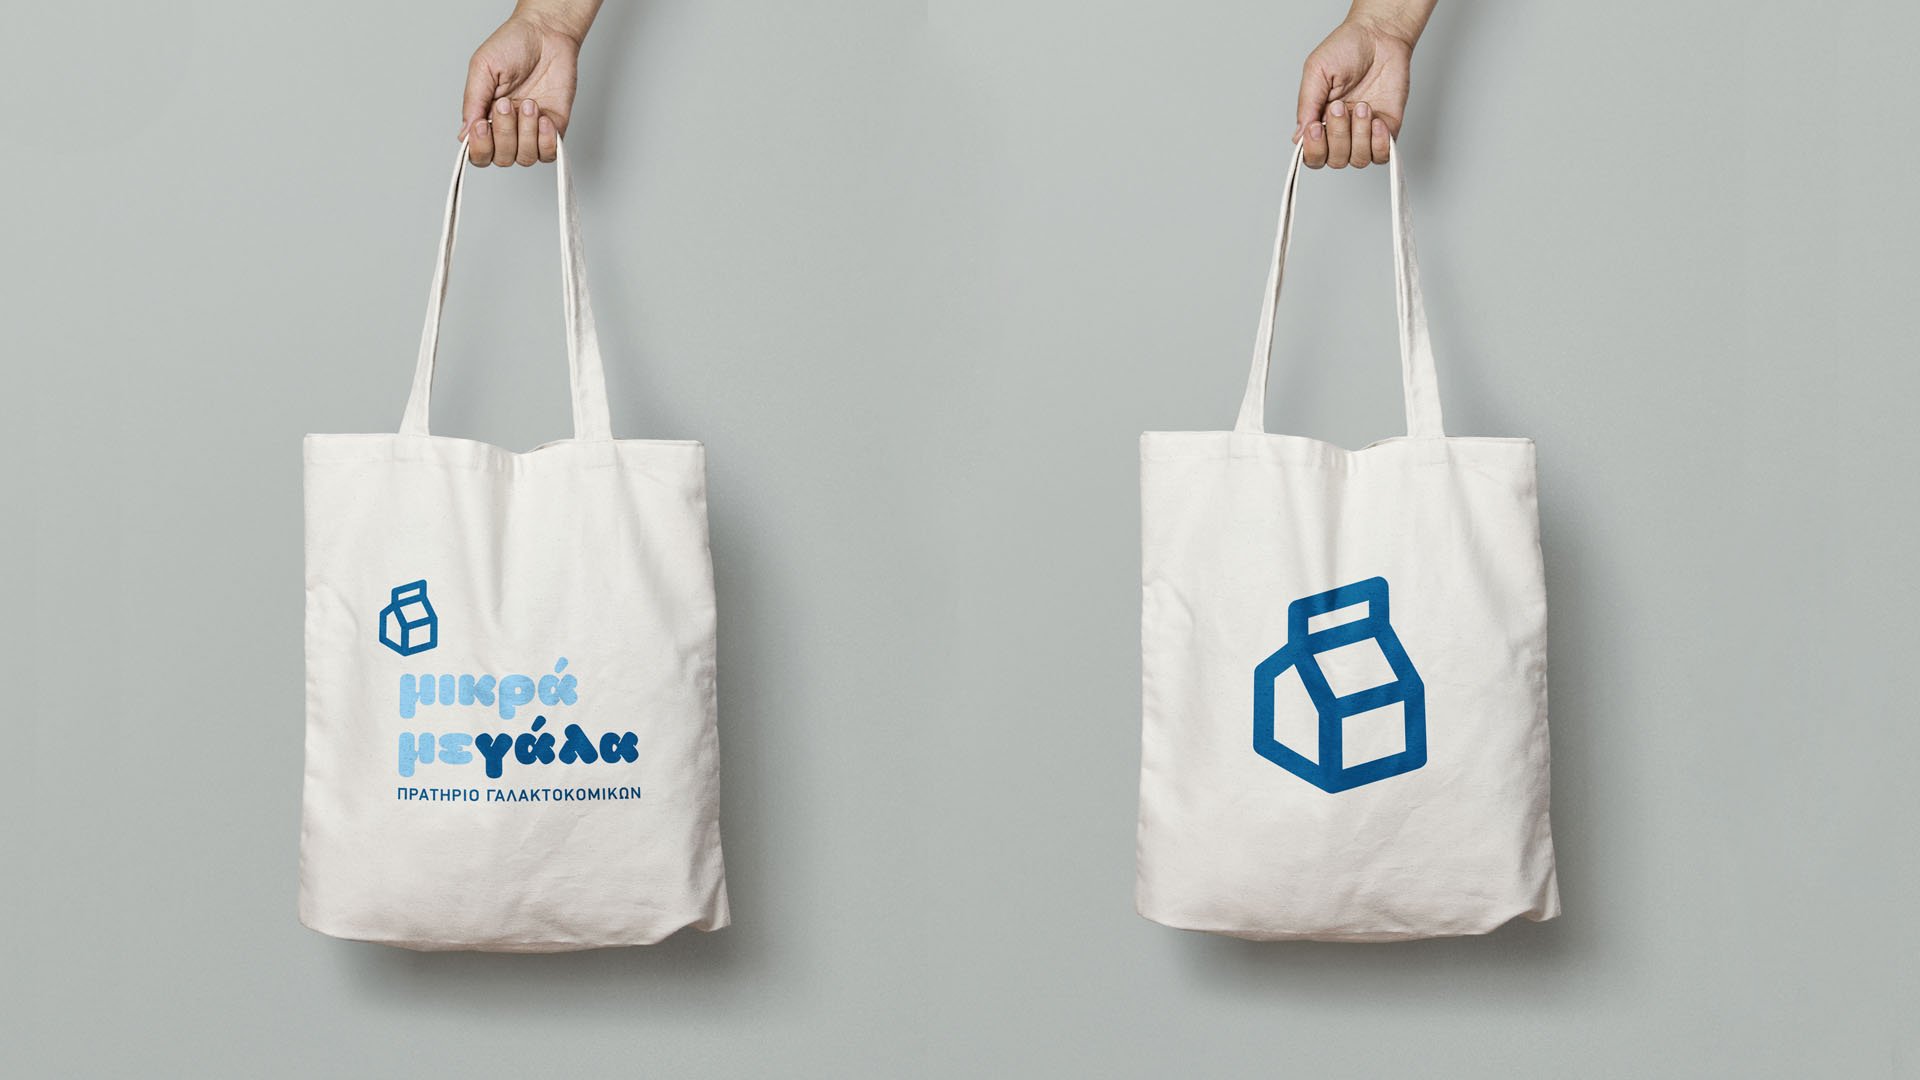 Eco-friendly branded tote bag for Mikra Megala creameries